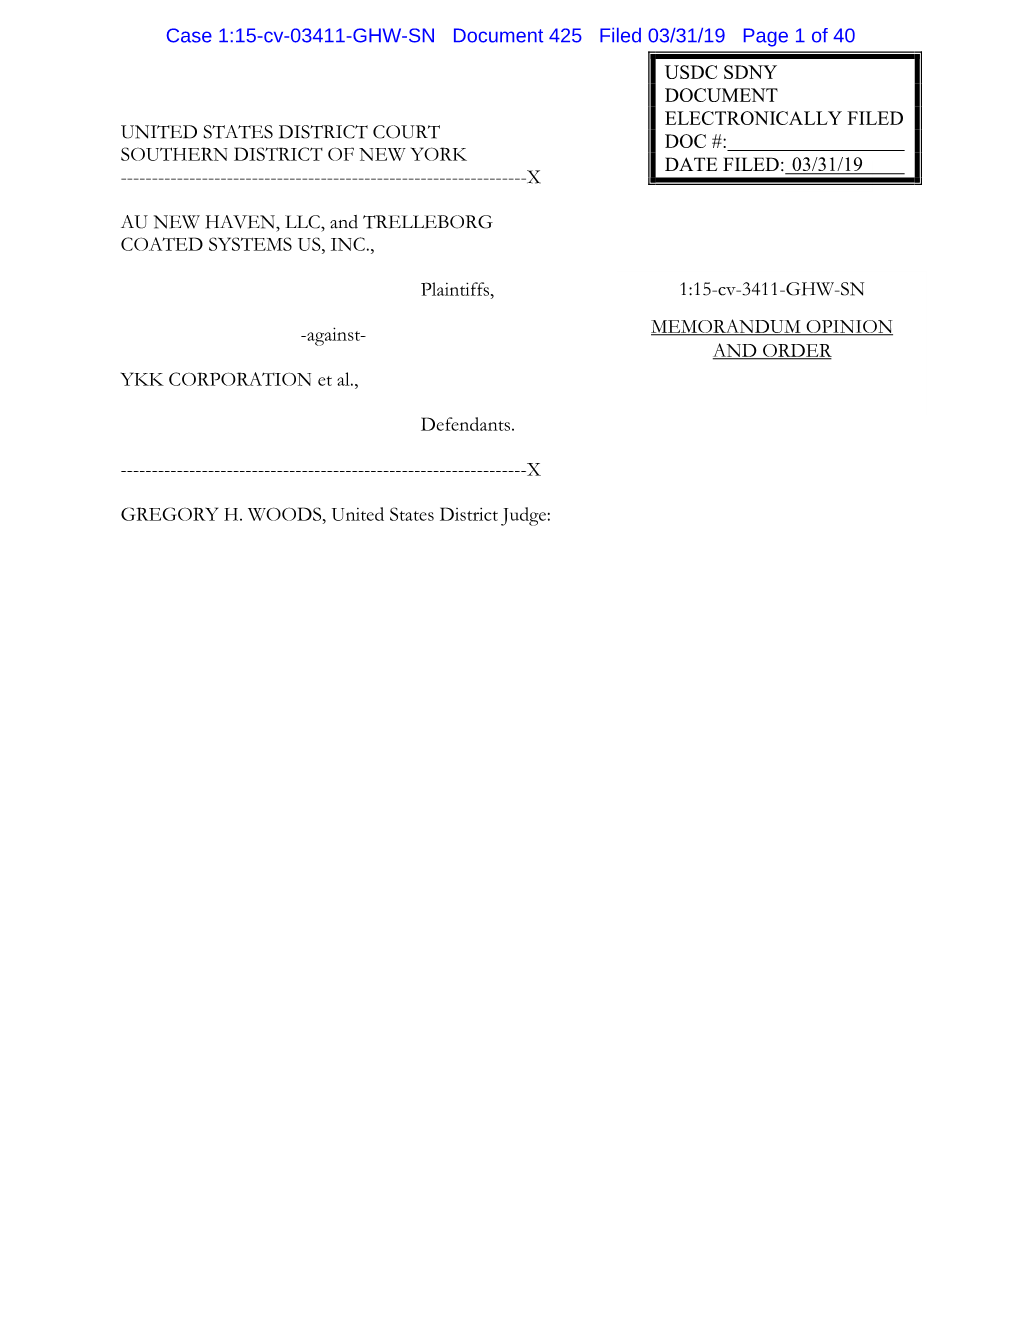 Case 1:15-Cv-03411-GHW-SN Document 425 Filed 03/31/19 Page 1 of 40